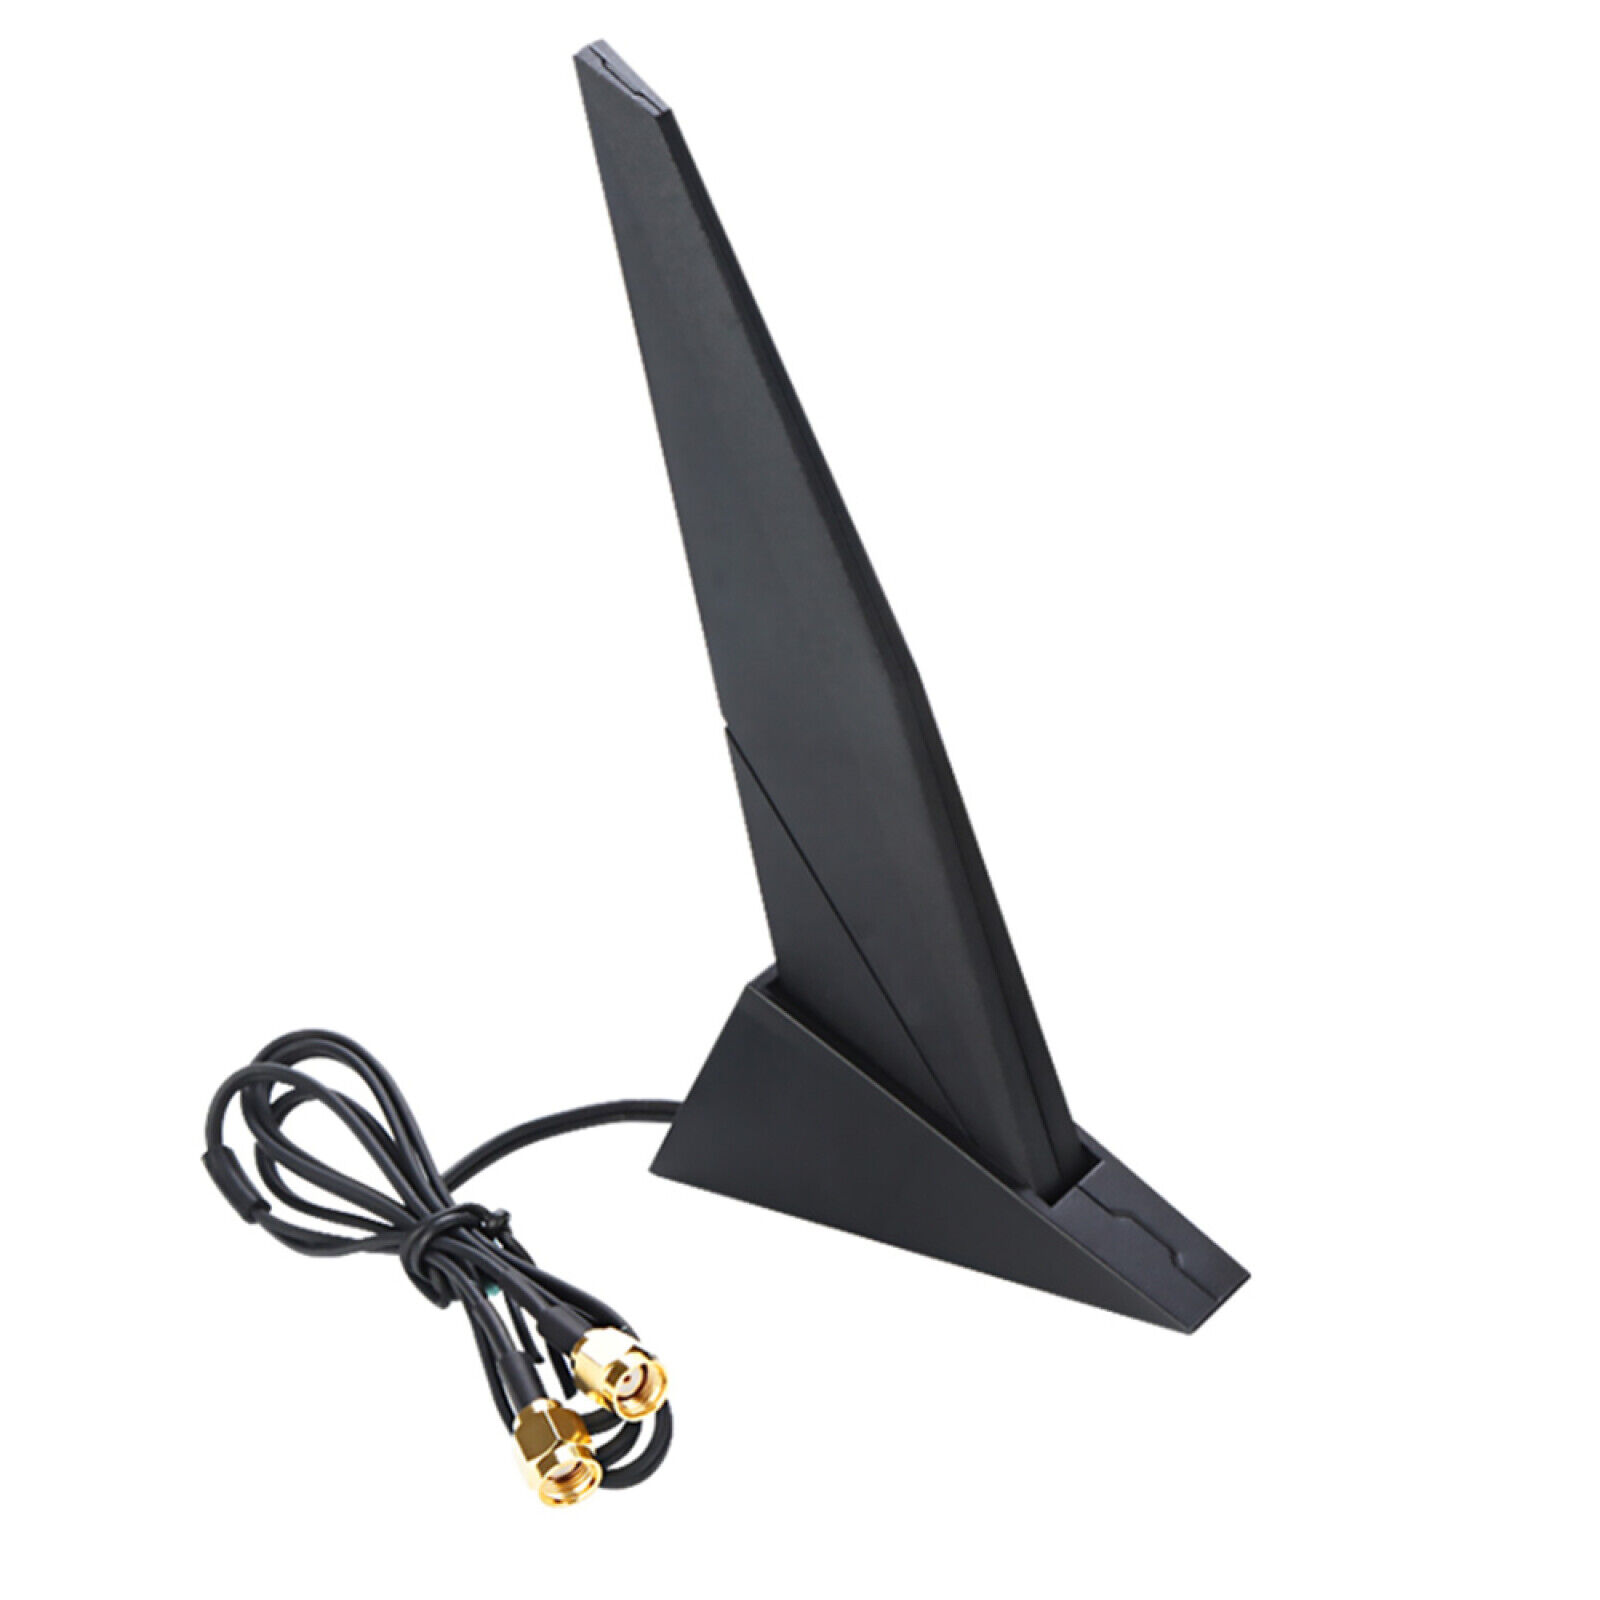 Dual Band WiFi Moving Antenna For ASUS Z390 Z490 X570 Motherboard 2T2R